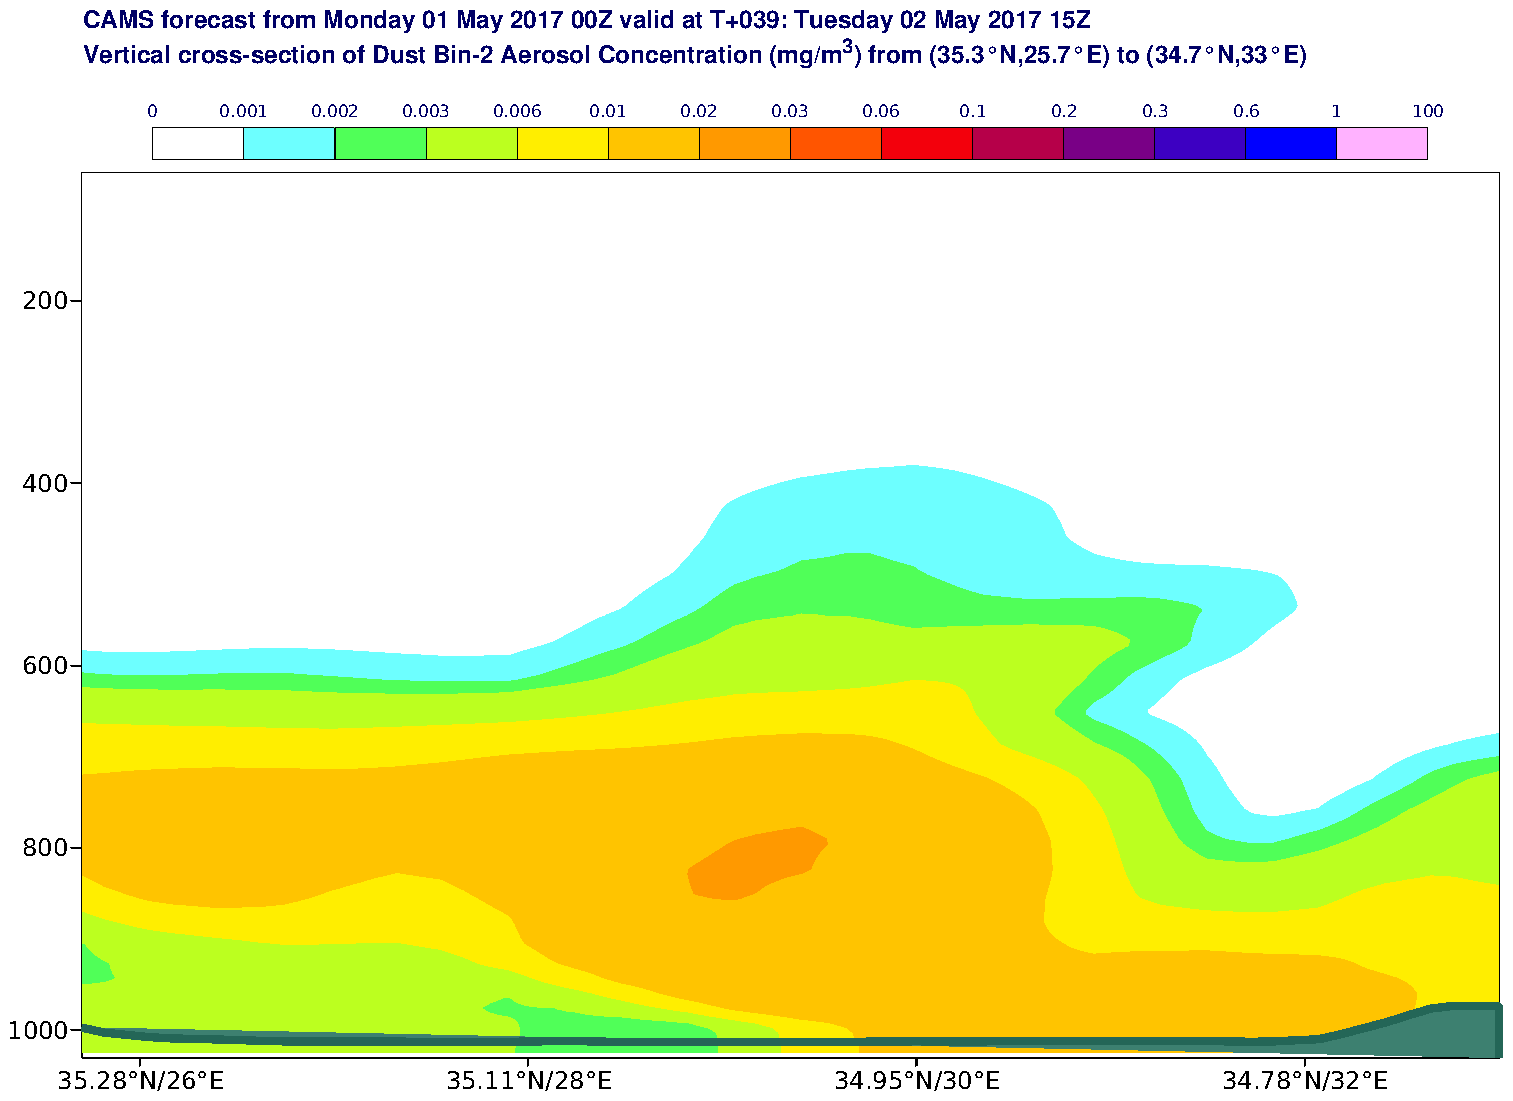 Vertical cross-section of Dust Bin-2 Aerosol Concentration (mg/m3) valid at T39 - 2017-05-02 15:00